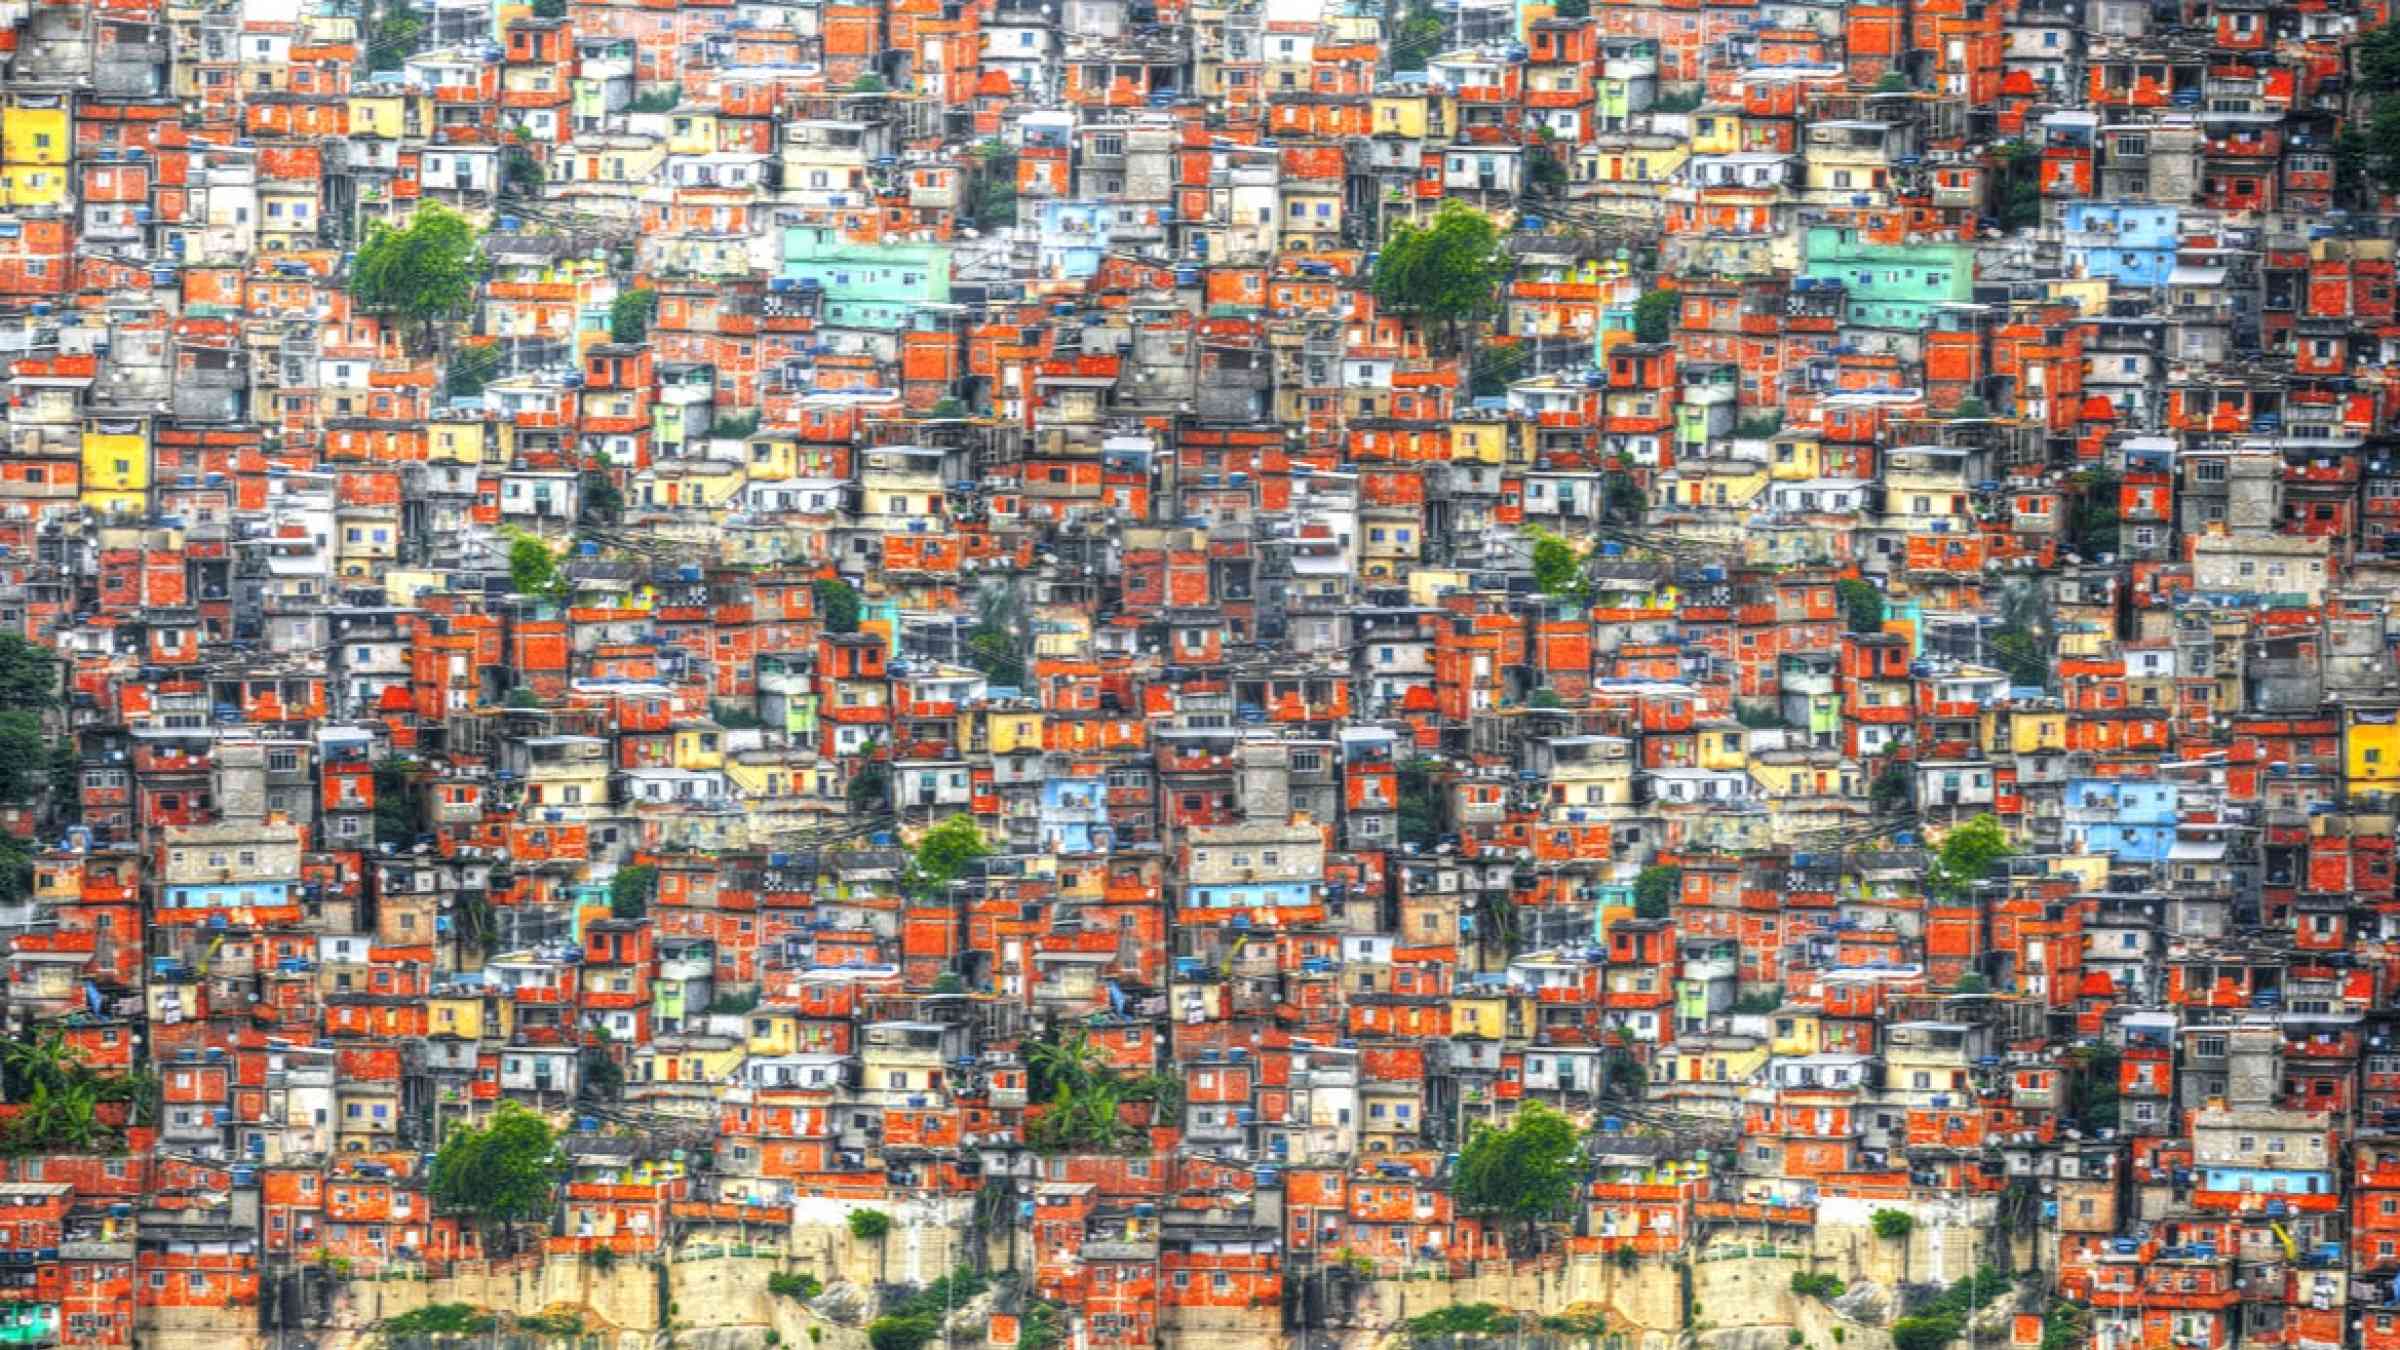 Colorful houses in the favela of Rio de Janeiro in Brazil.